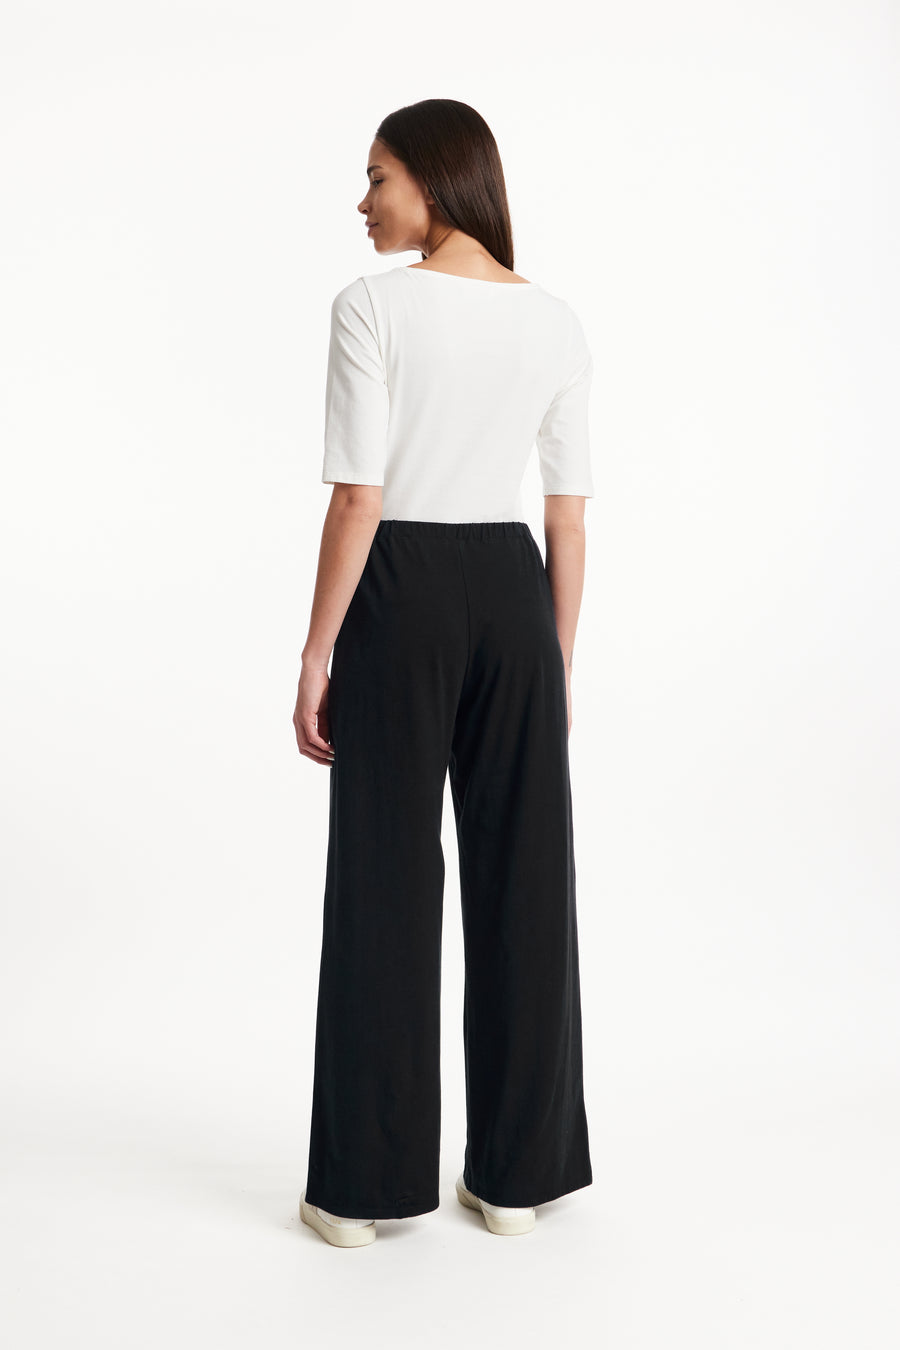 People Tree Fair Trade, Ethical & Sustainable Jacinta trousers in Black 95% organic certified cotton, 5% elastane